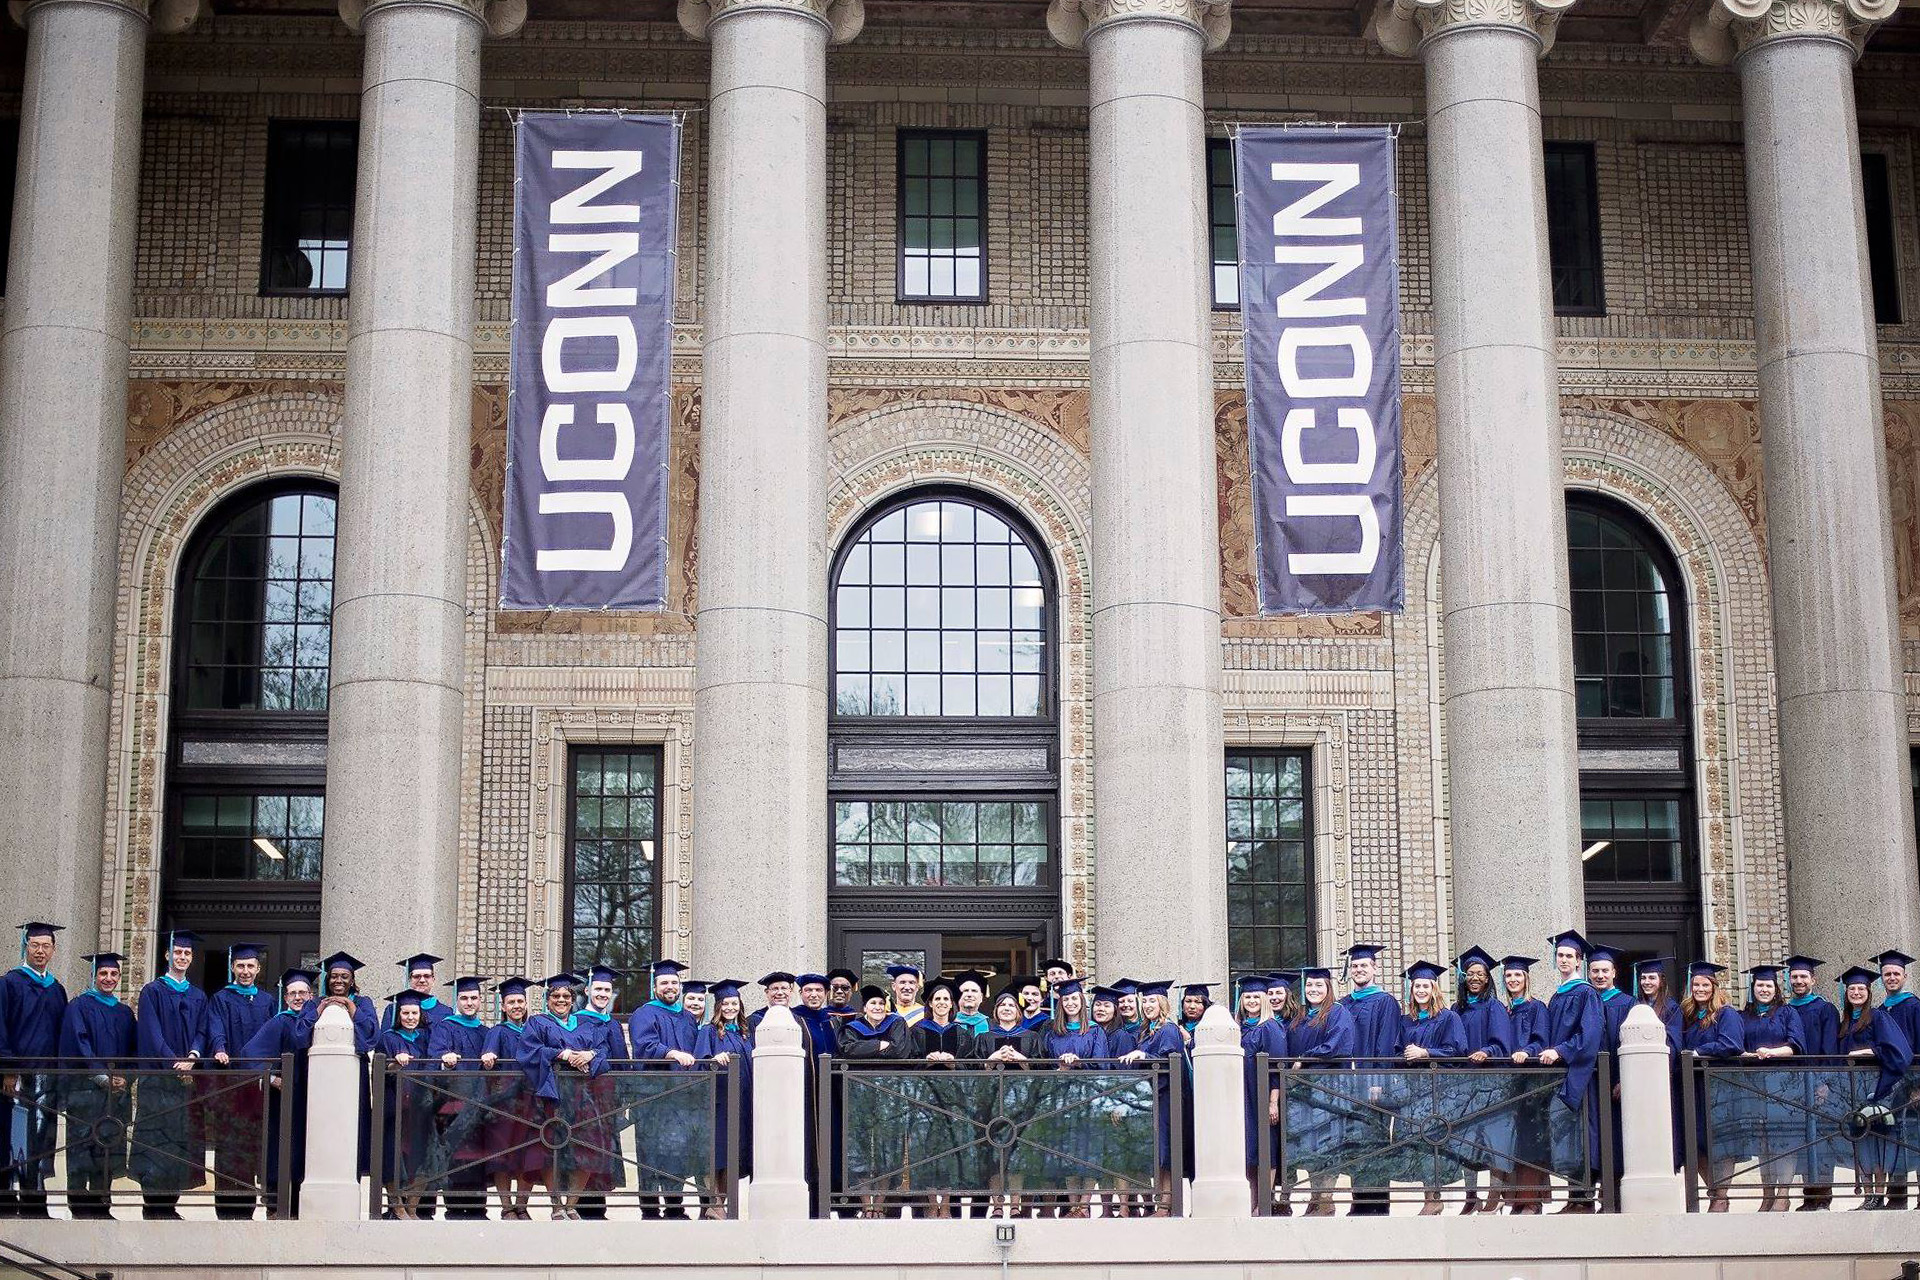 A large group of alumni and faculty in academic regalia lined up in front of the Hartford Times Building beneath two large UConn banners.